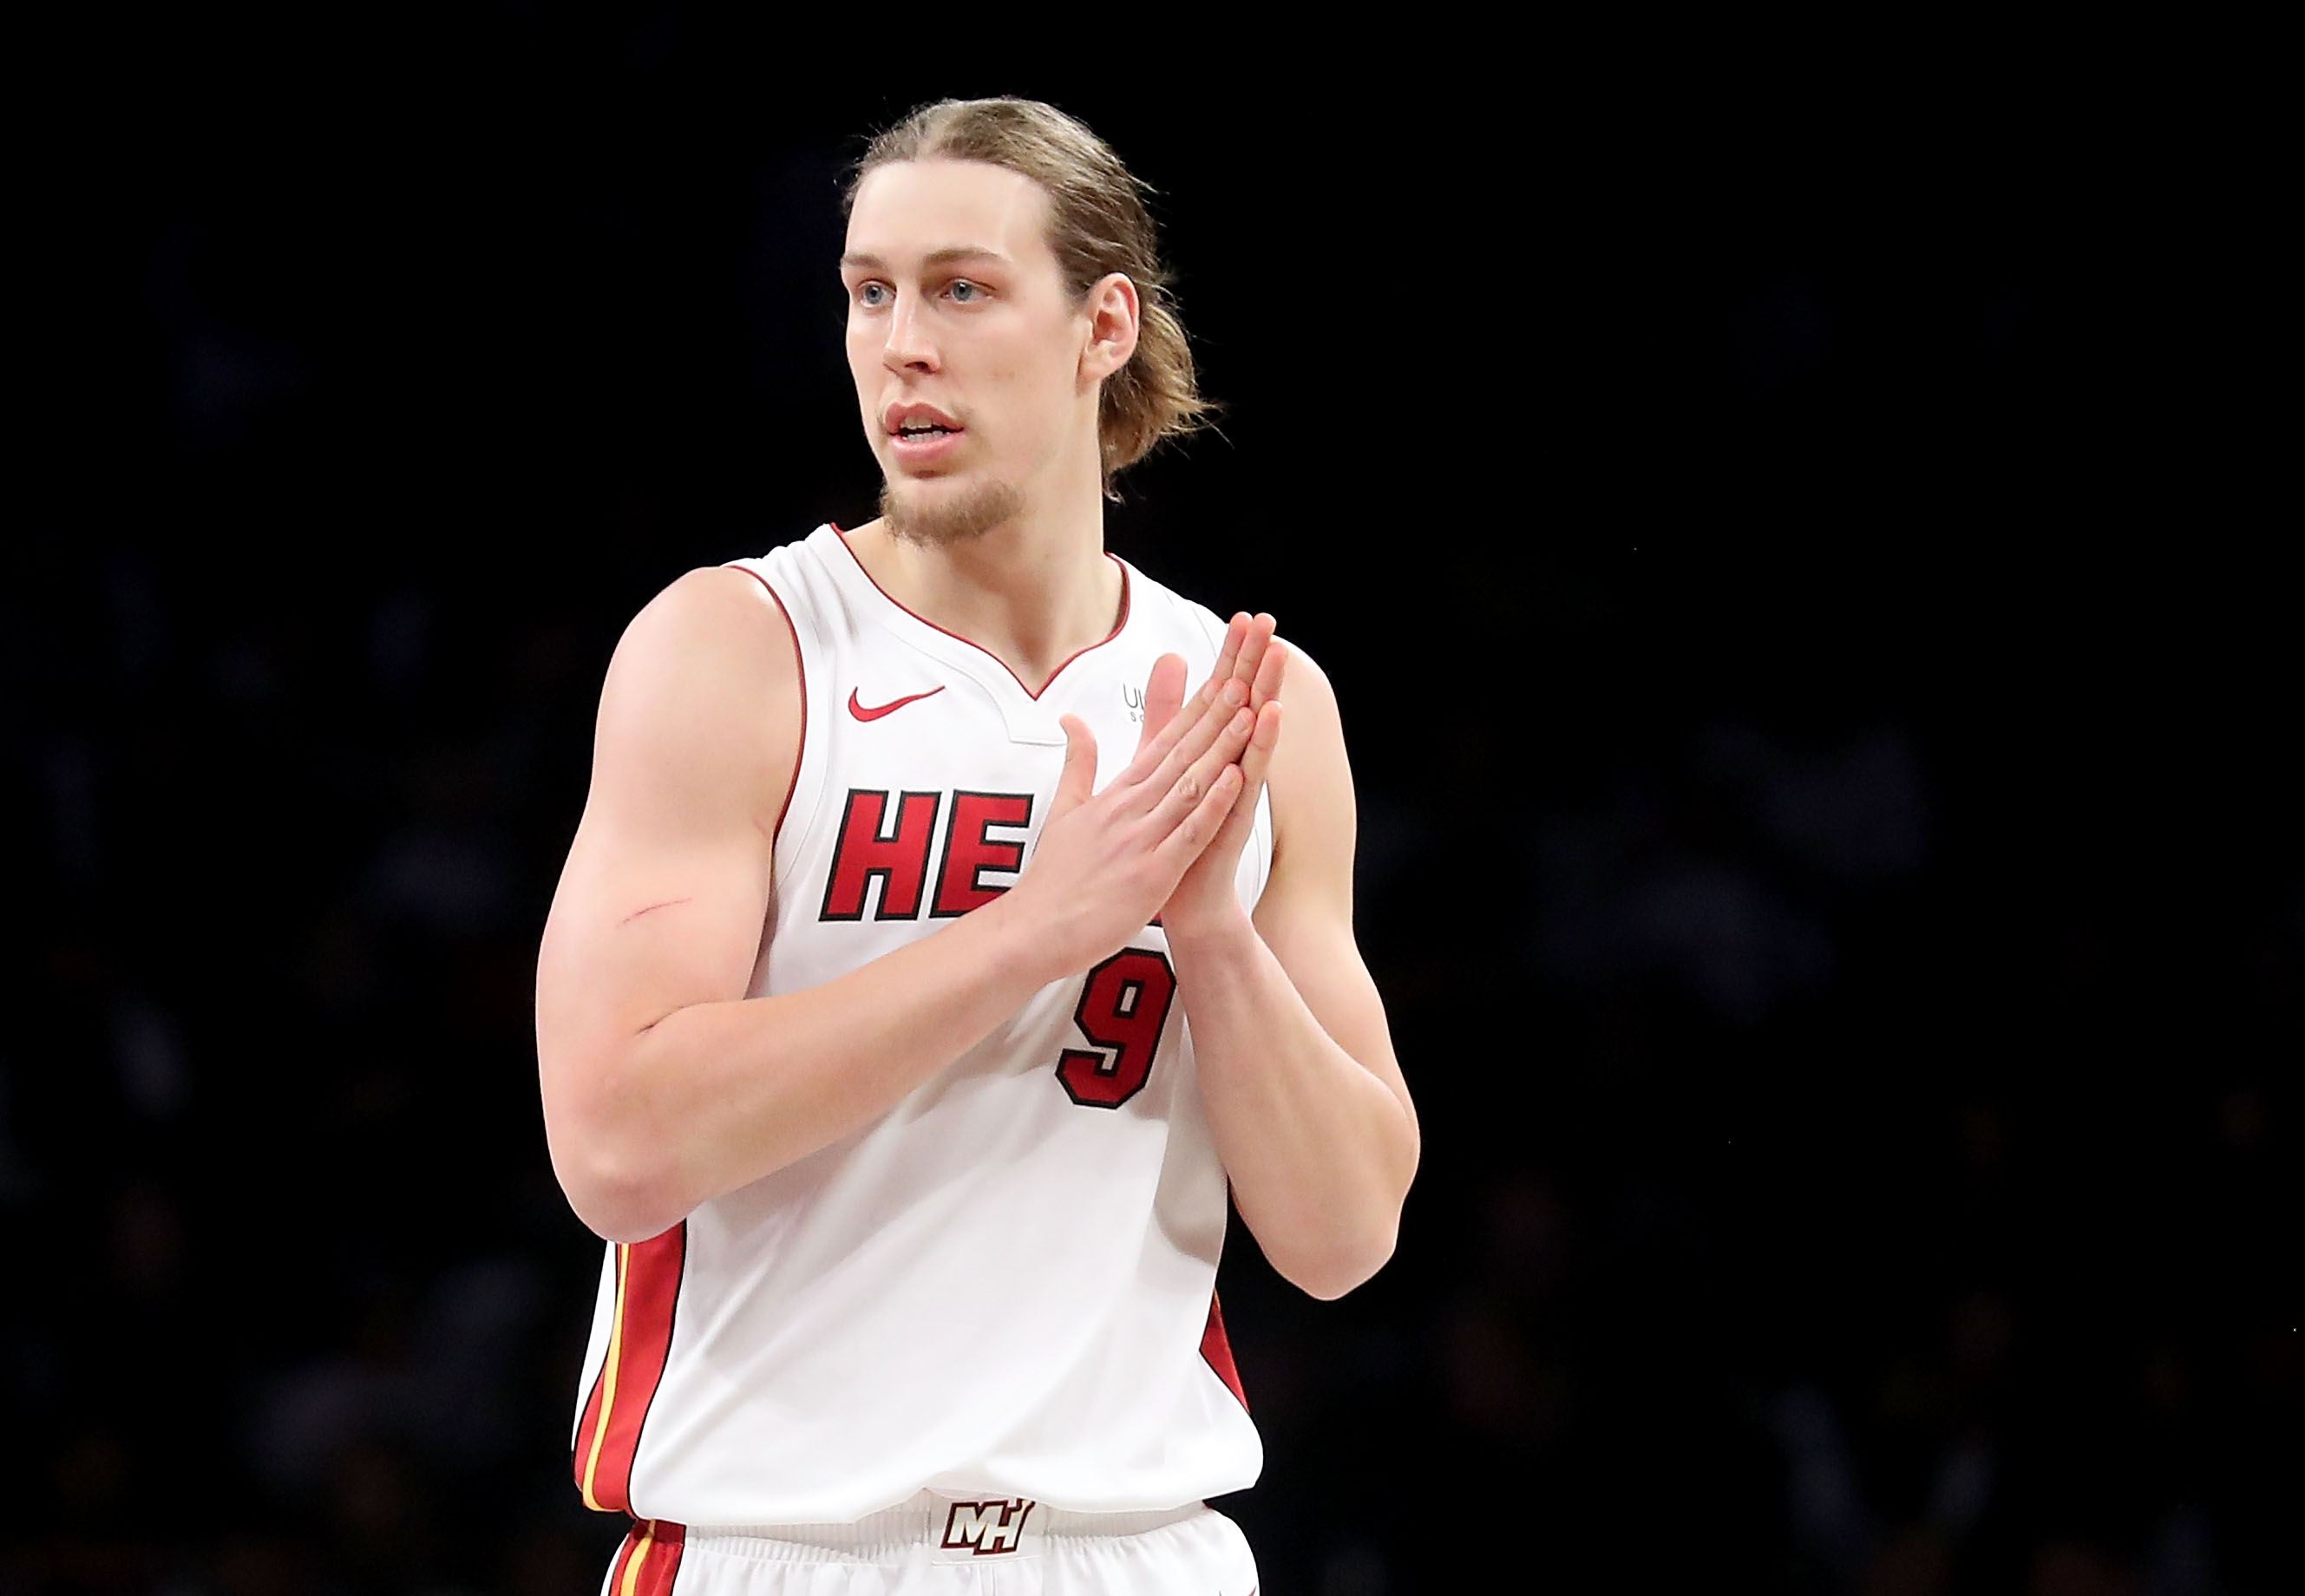 Miami Heat: The overall dynamic effect of Kelly Olynyk